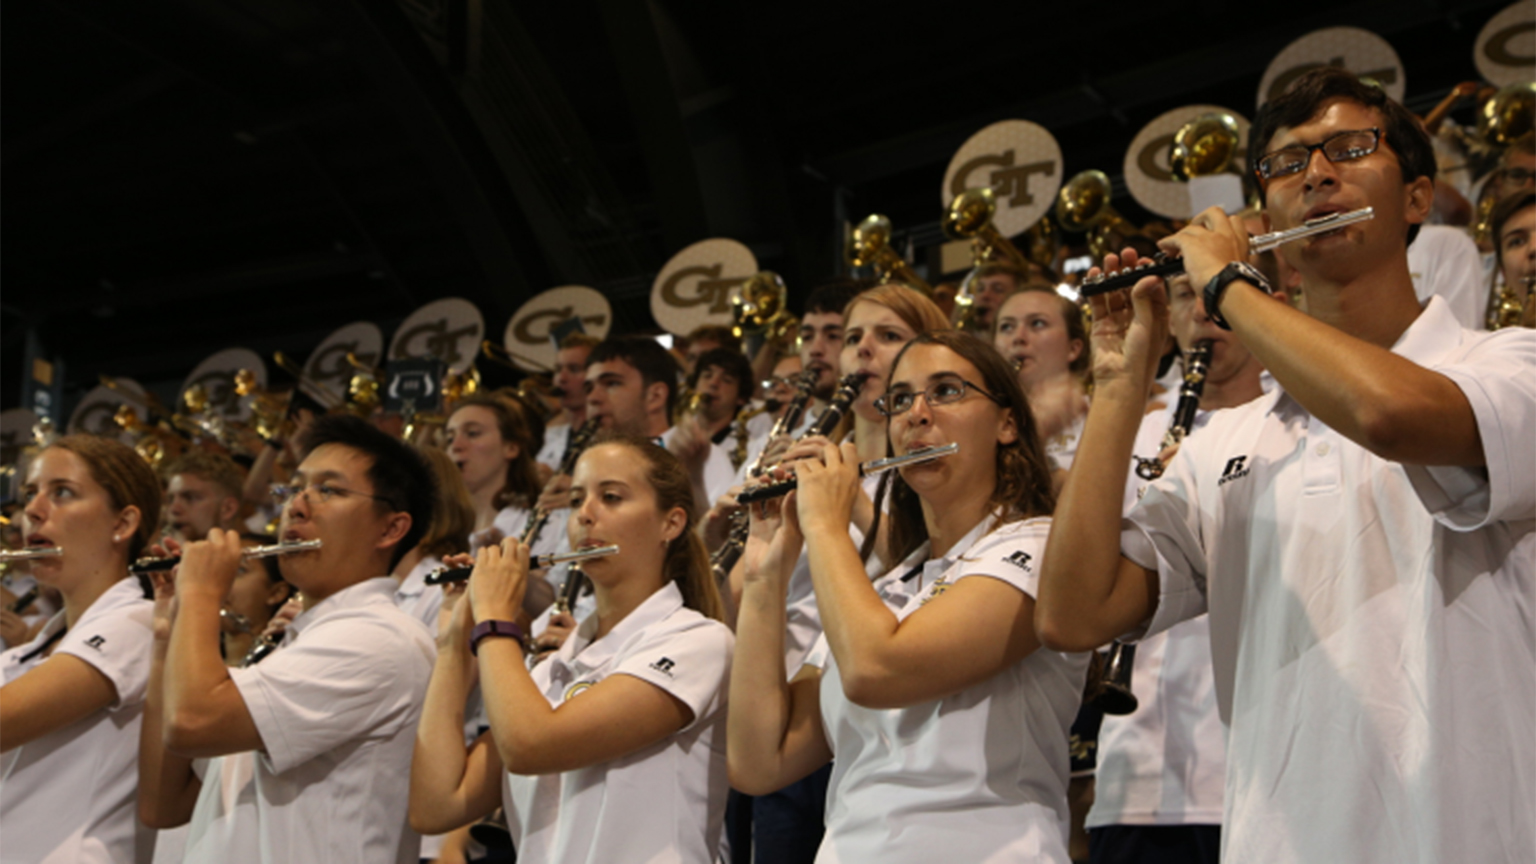 Members of the Pep Band performing at a game.